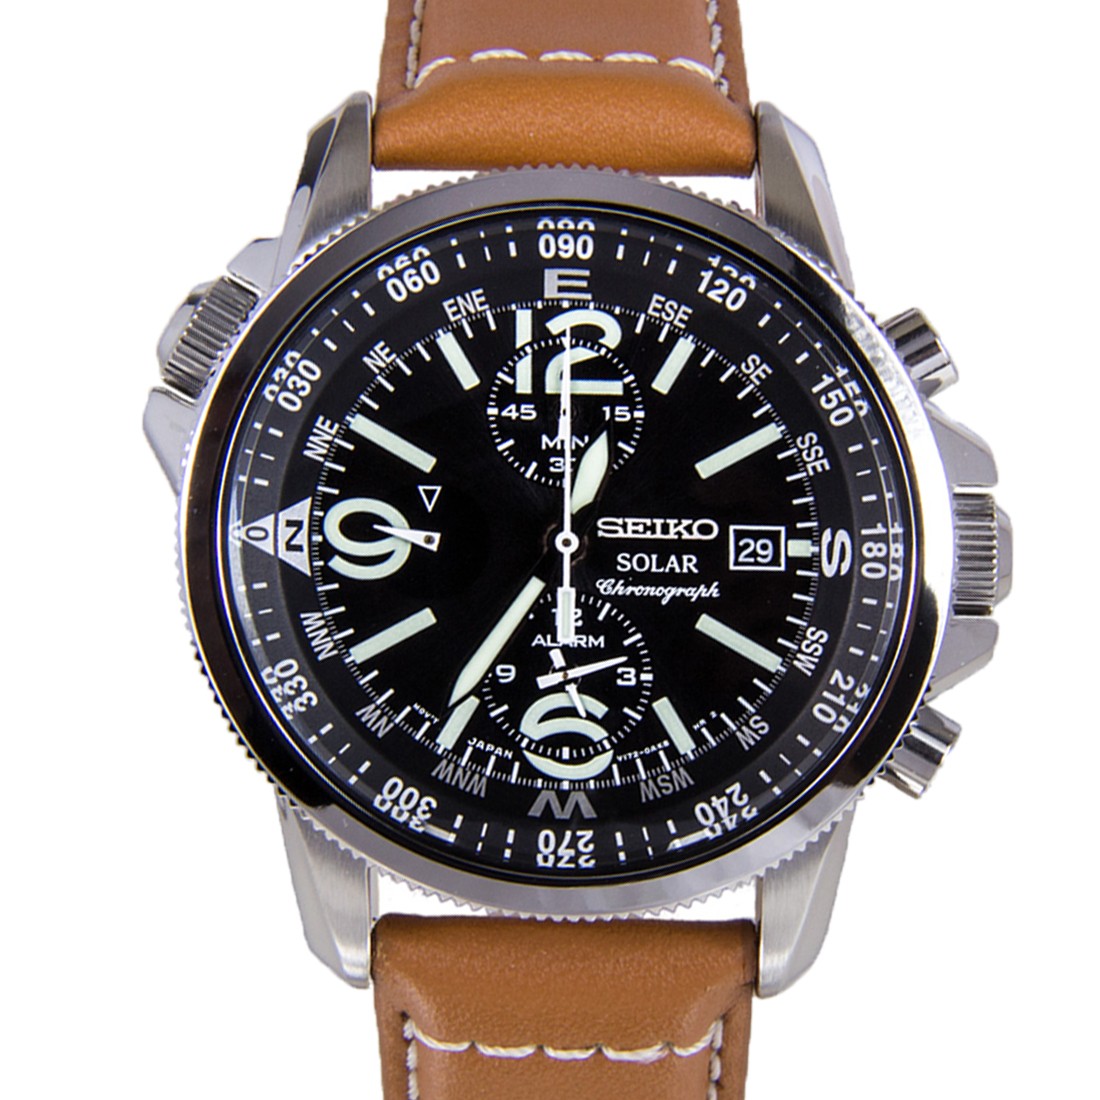 SSC081P1 Gents Seiko Stainless Steel Brown Leather Strap Watch